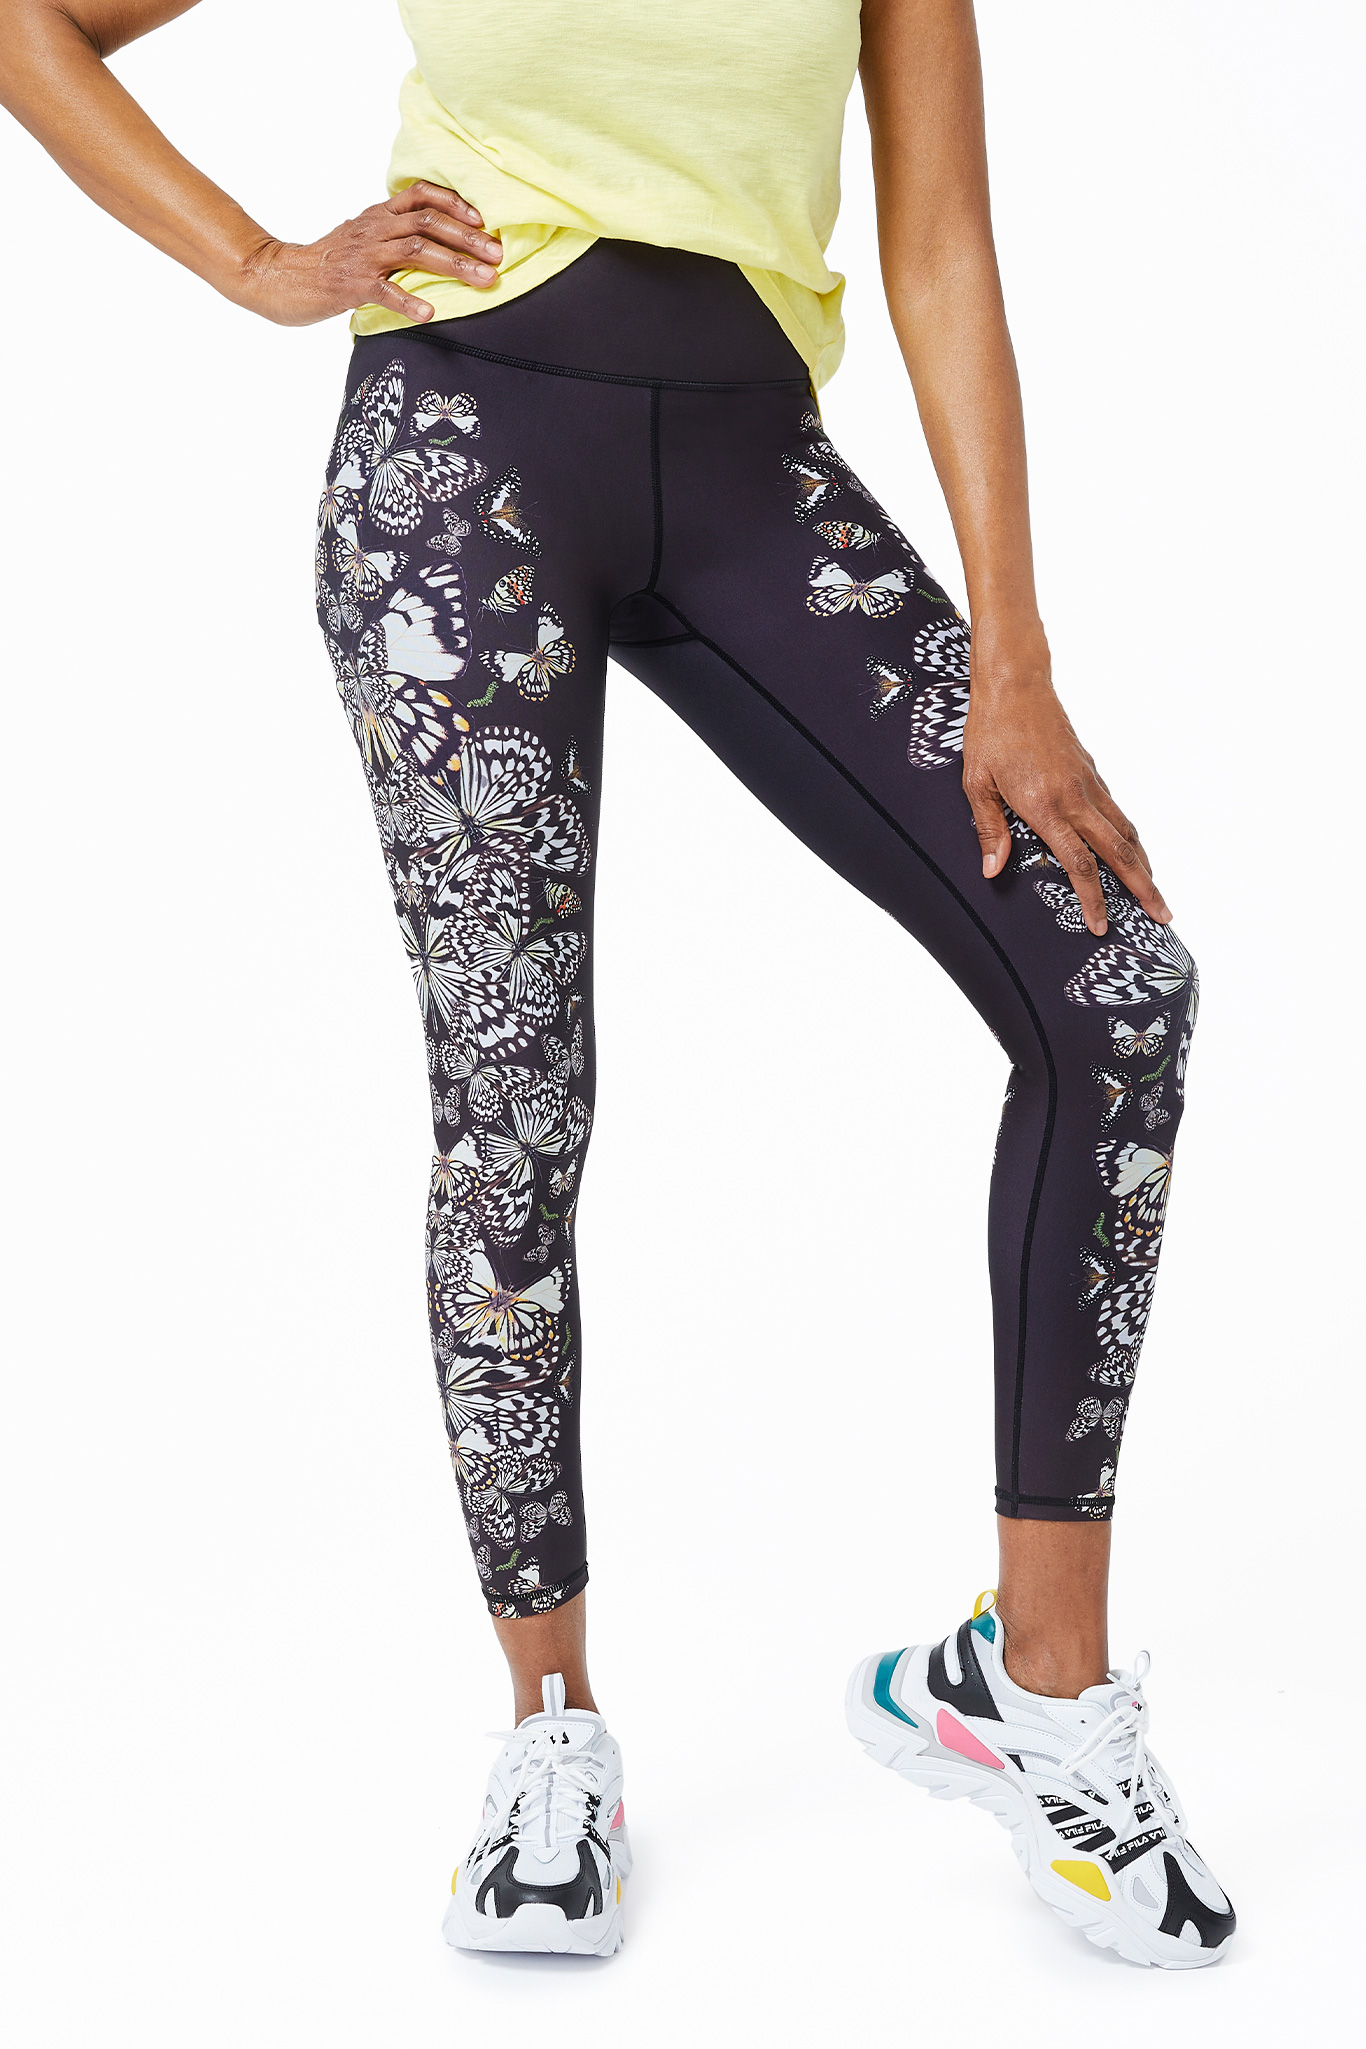 HAPPY 2021!!😁!! NEW YEAR, NEW YOU!! 🌟TEREZ Leggings🌟Black with